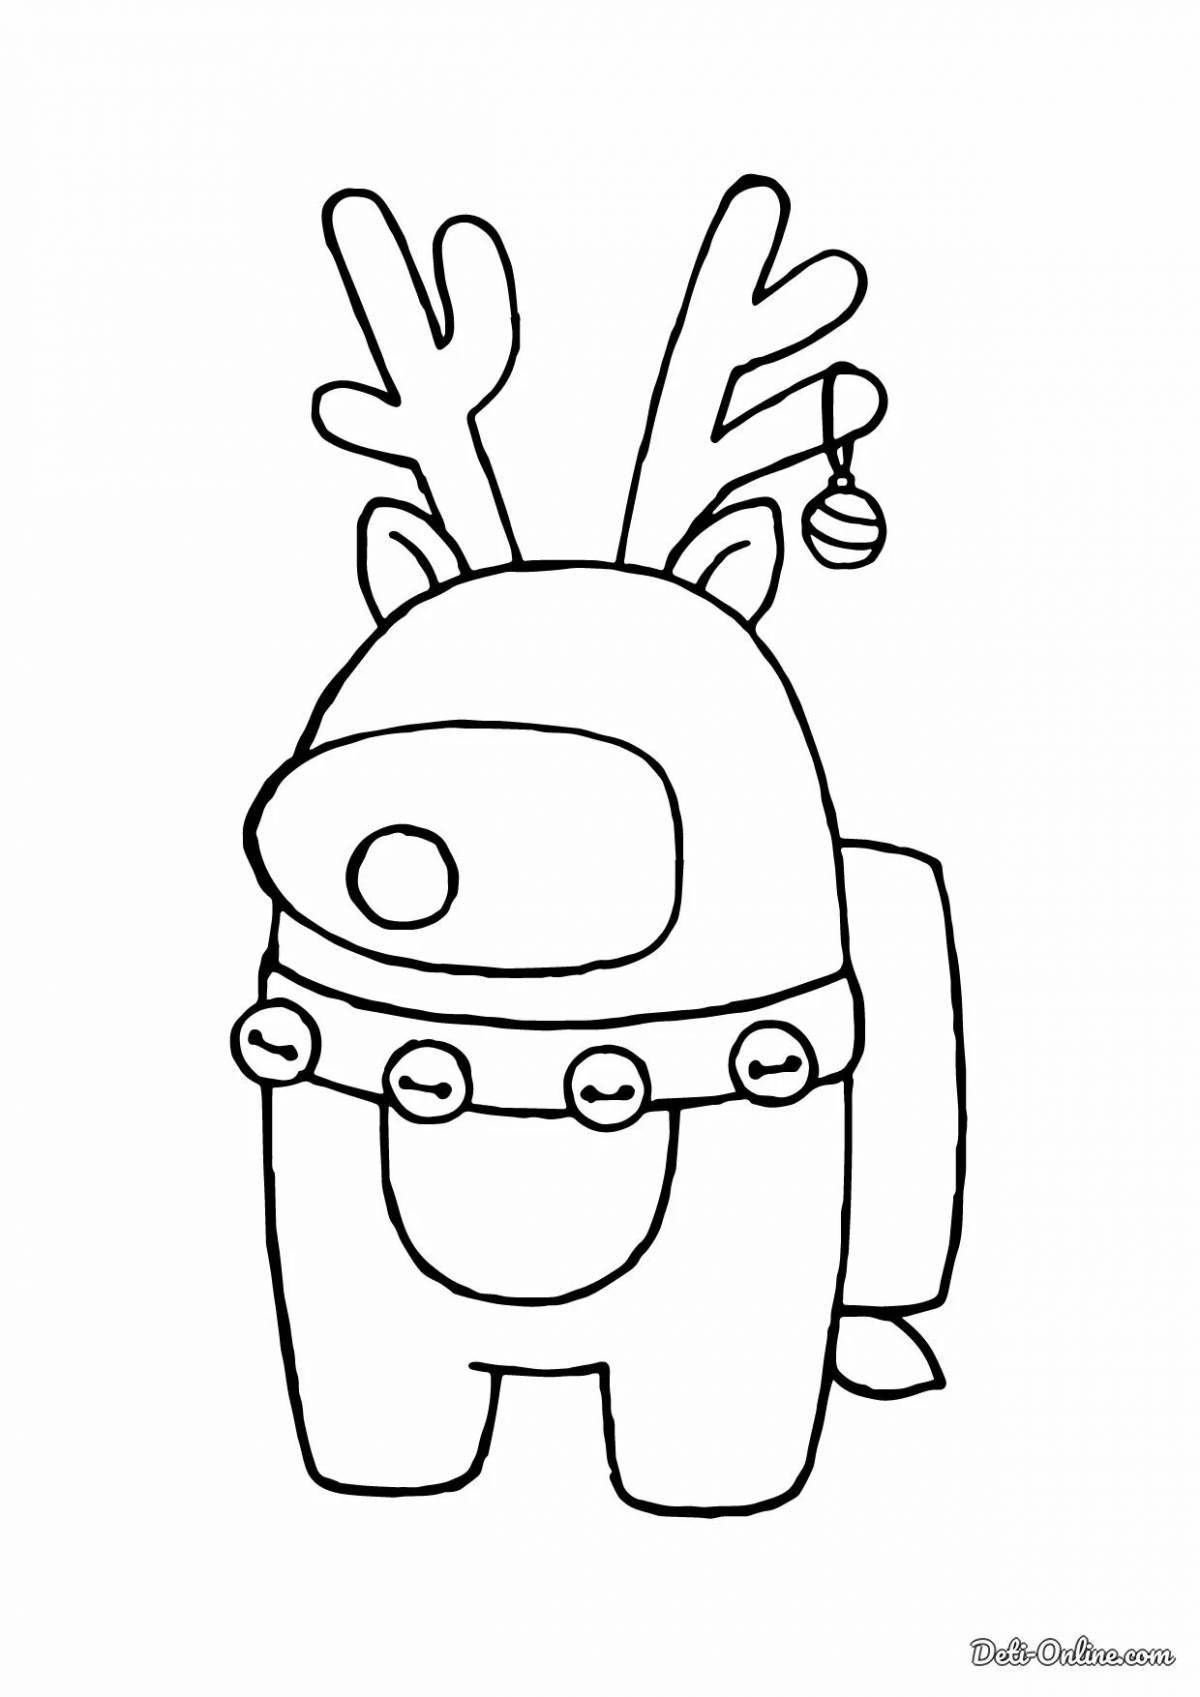 Amangas playful coloring page